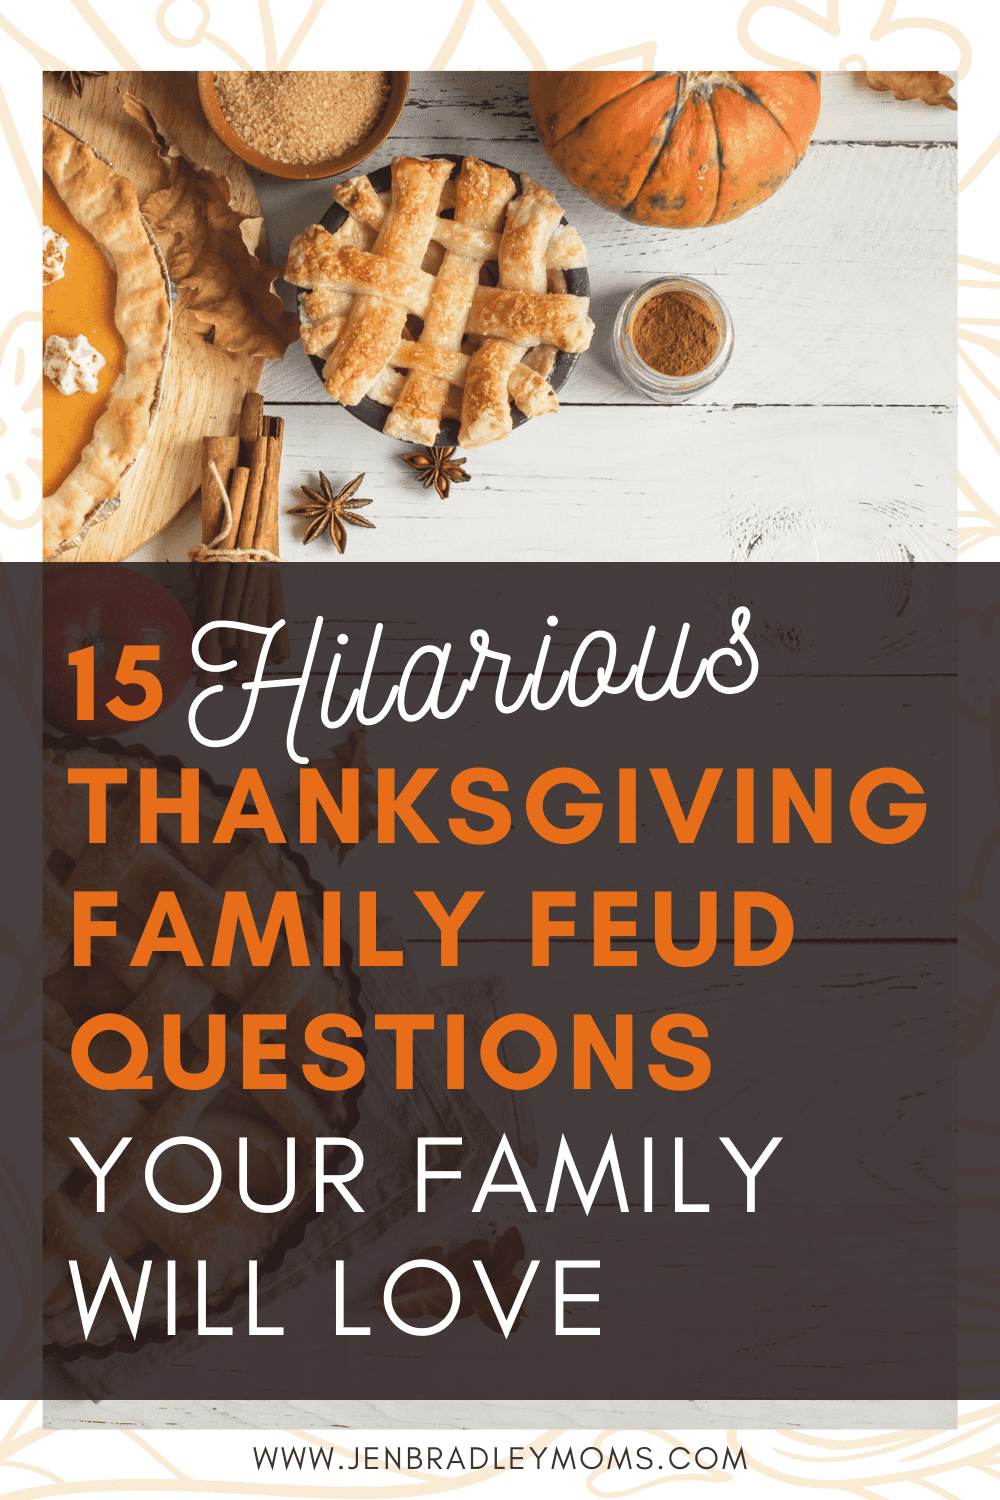 15 Hilarious Thanksgiving Family Feud Questions Your Family Will Love